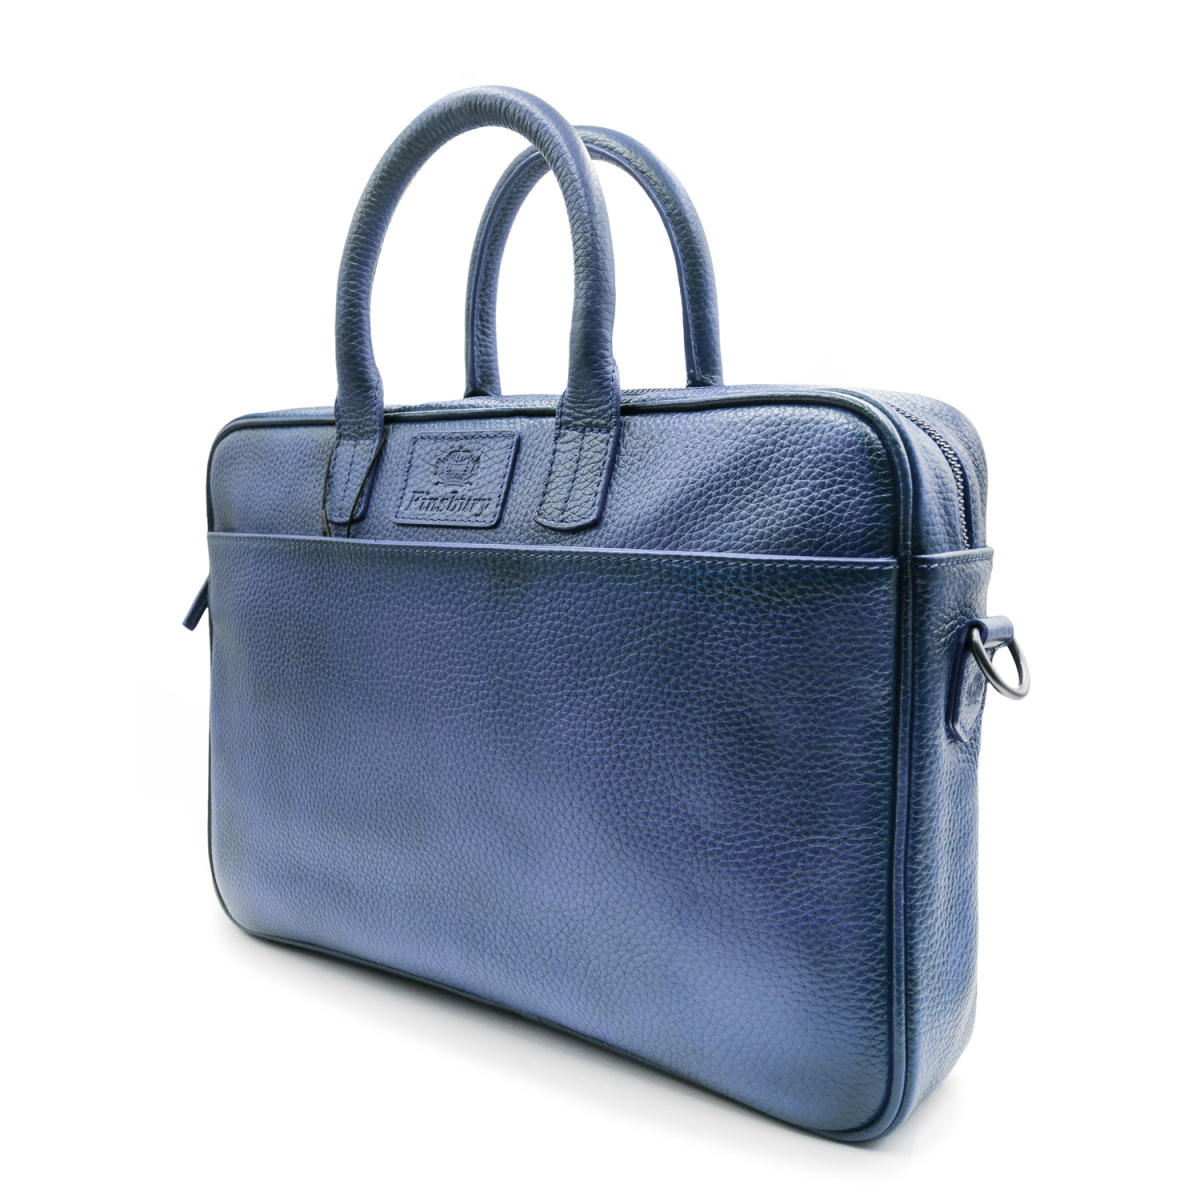 Blue Grene Grained Briefcase